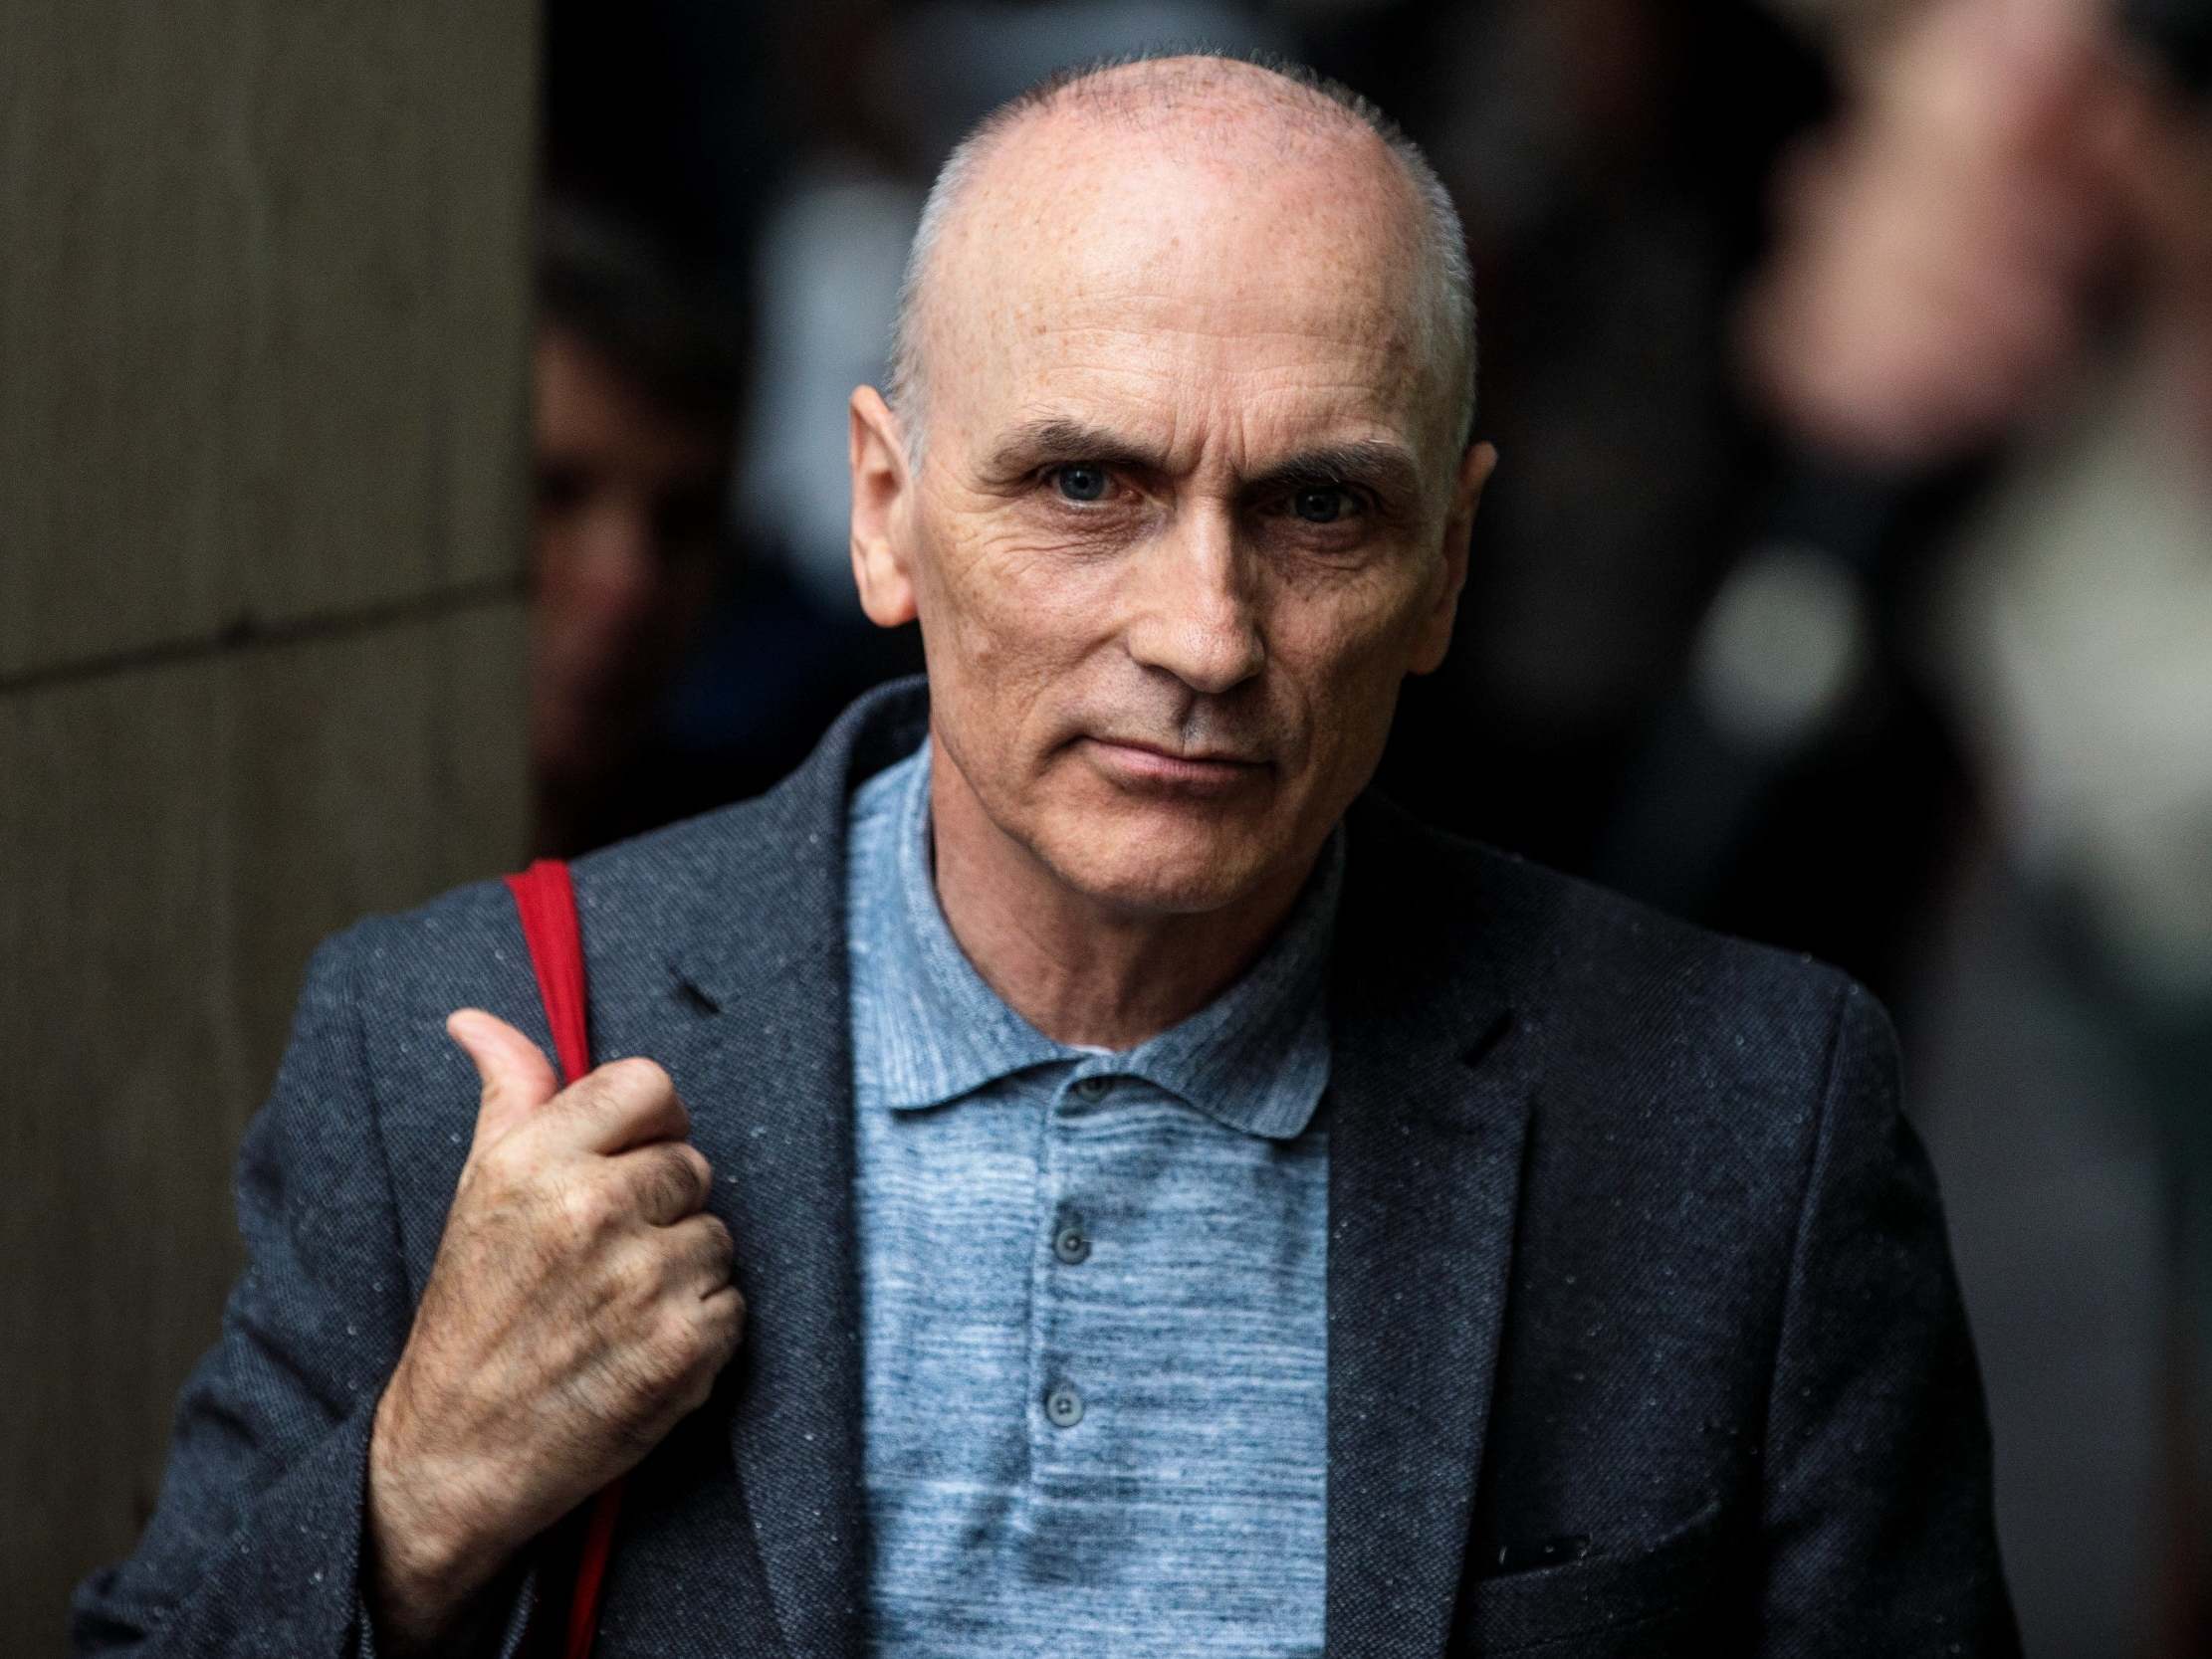 Labour facing fresh Chris Williamson row as suspended MP set to speak at 'multiple' events at party conference